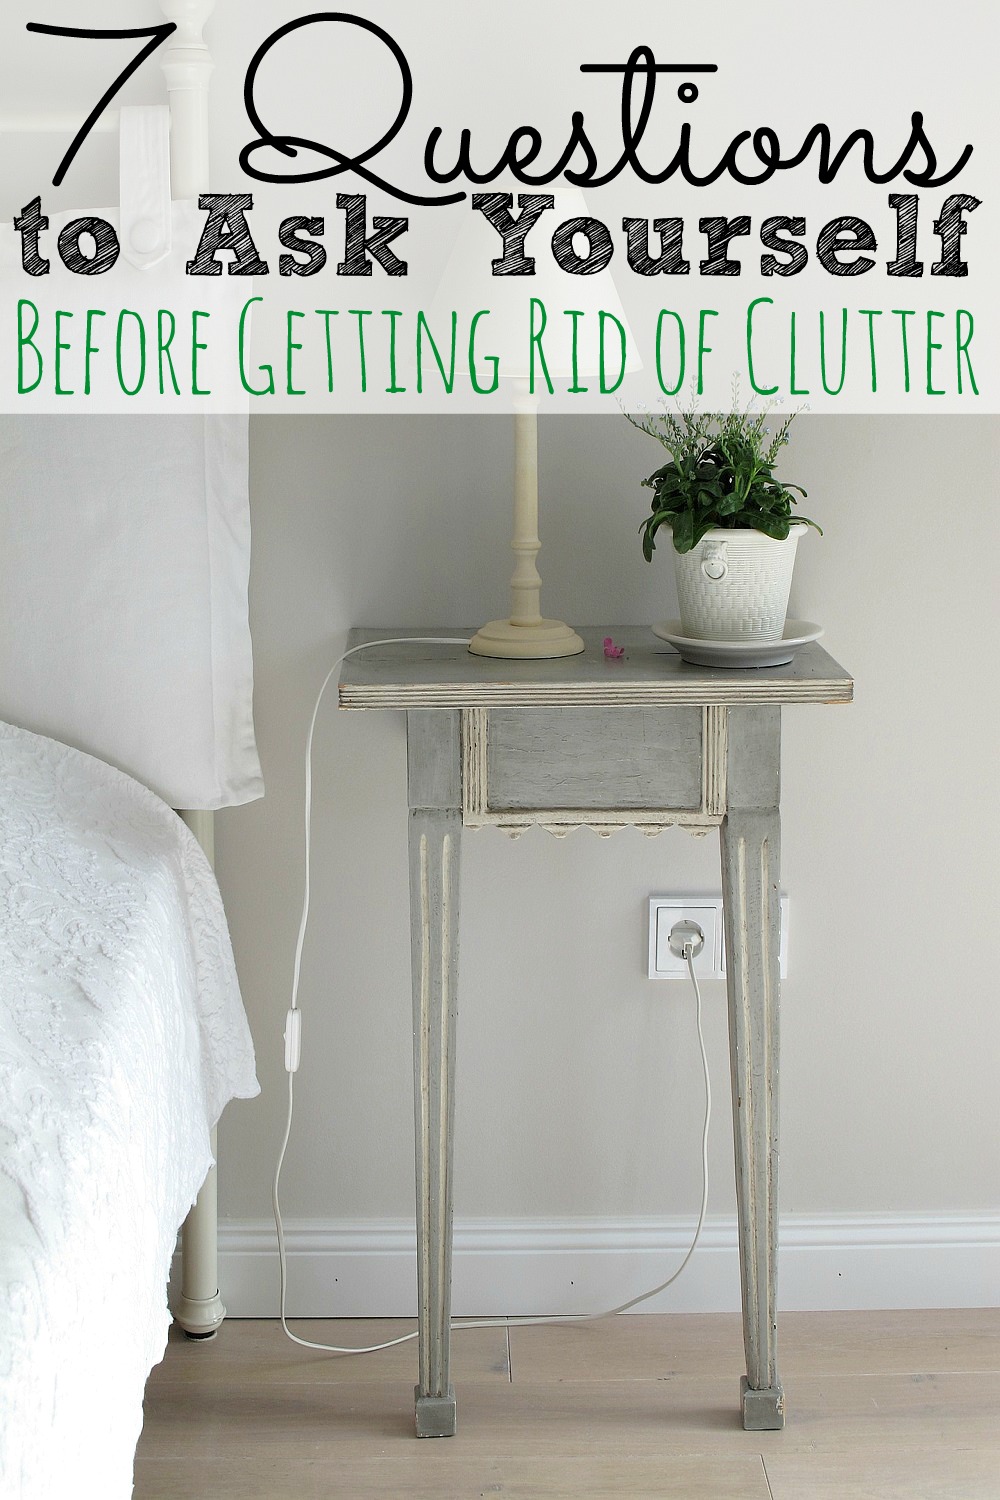 7 Questions to Ask Yourself Before Getting Rid of Clutter - abccreativelearning.com